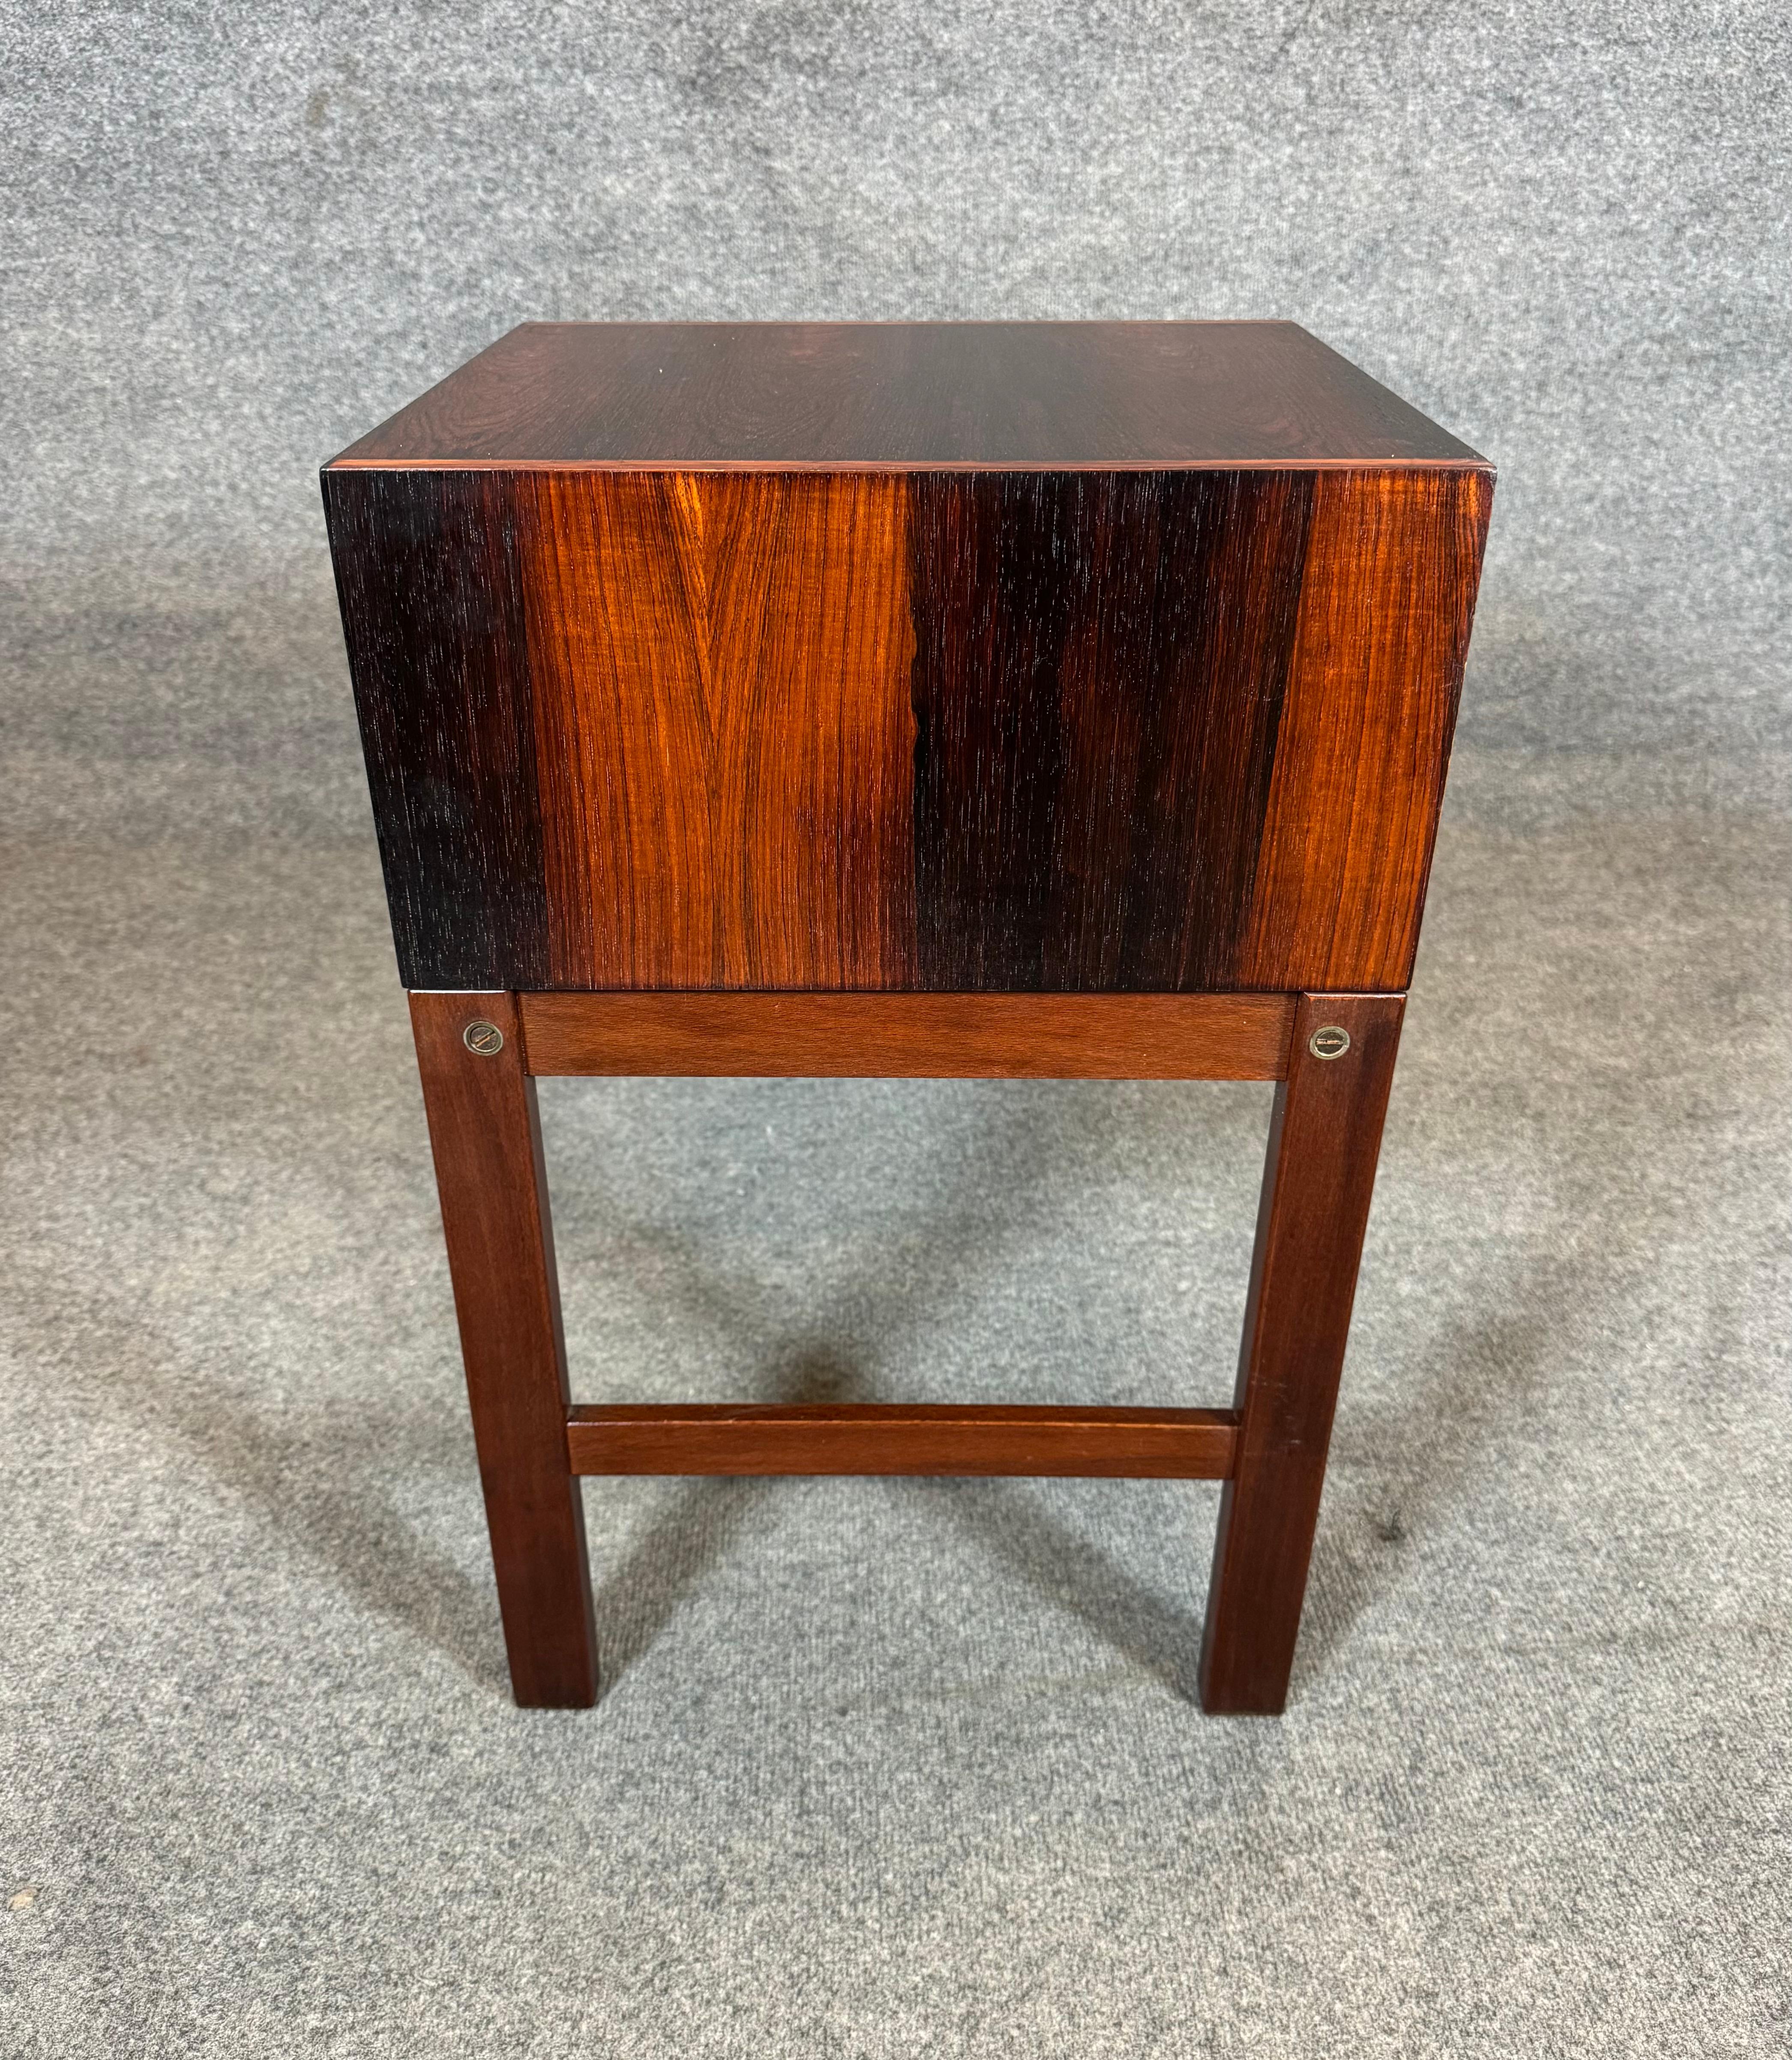 Here is a beautiful Scandinavian modern entry way/telephone bench in rosewood manufactured in Denmark in the 1960's.
This exquisite piece, recently imported from Europe to California before its refinishing, features a seating area with a brand new